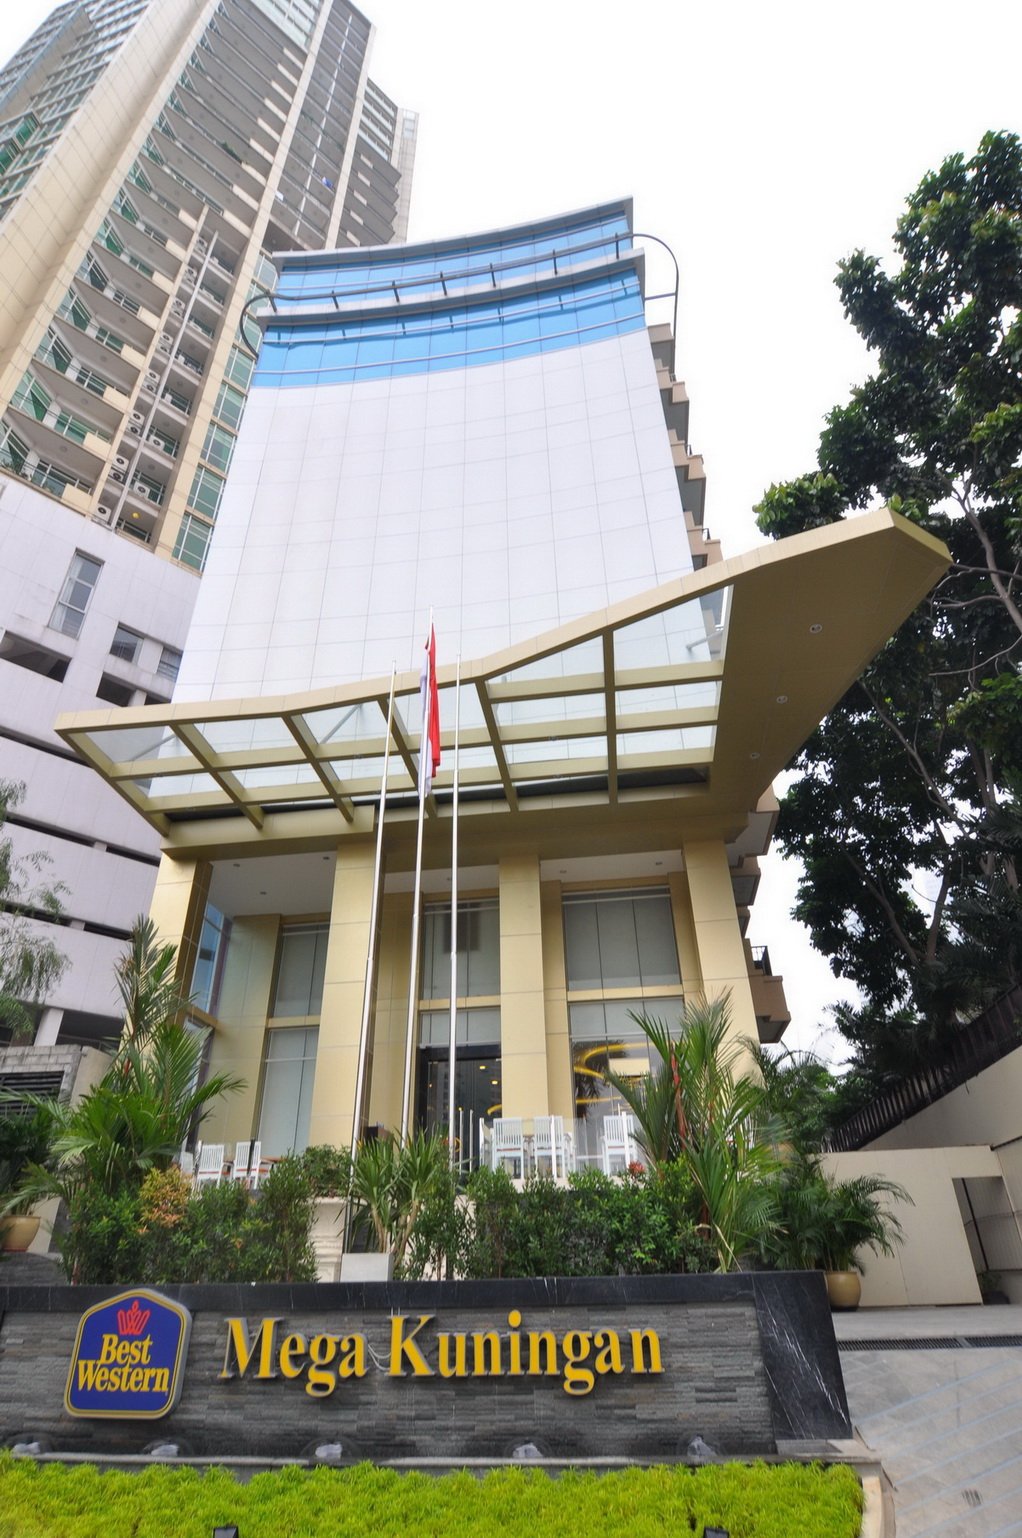 Best Western Adds Exciting New Jakarta Hotel